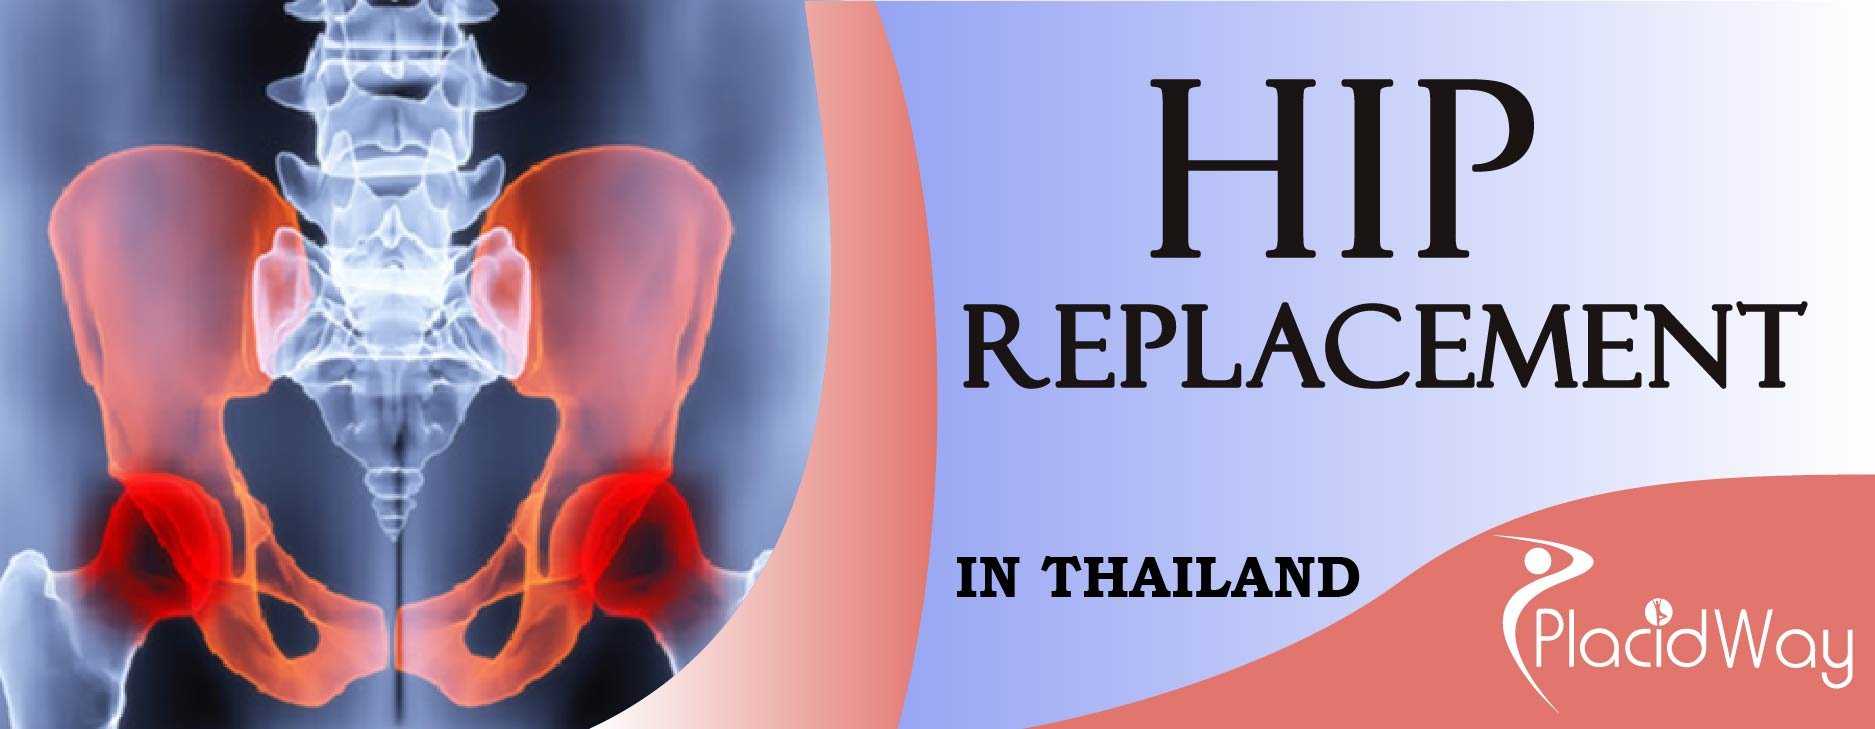 Hip Replacement in Thailand, Orthopedic Surgery in Thailand